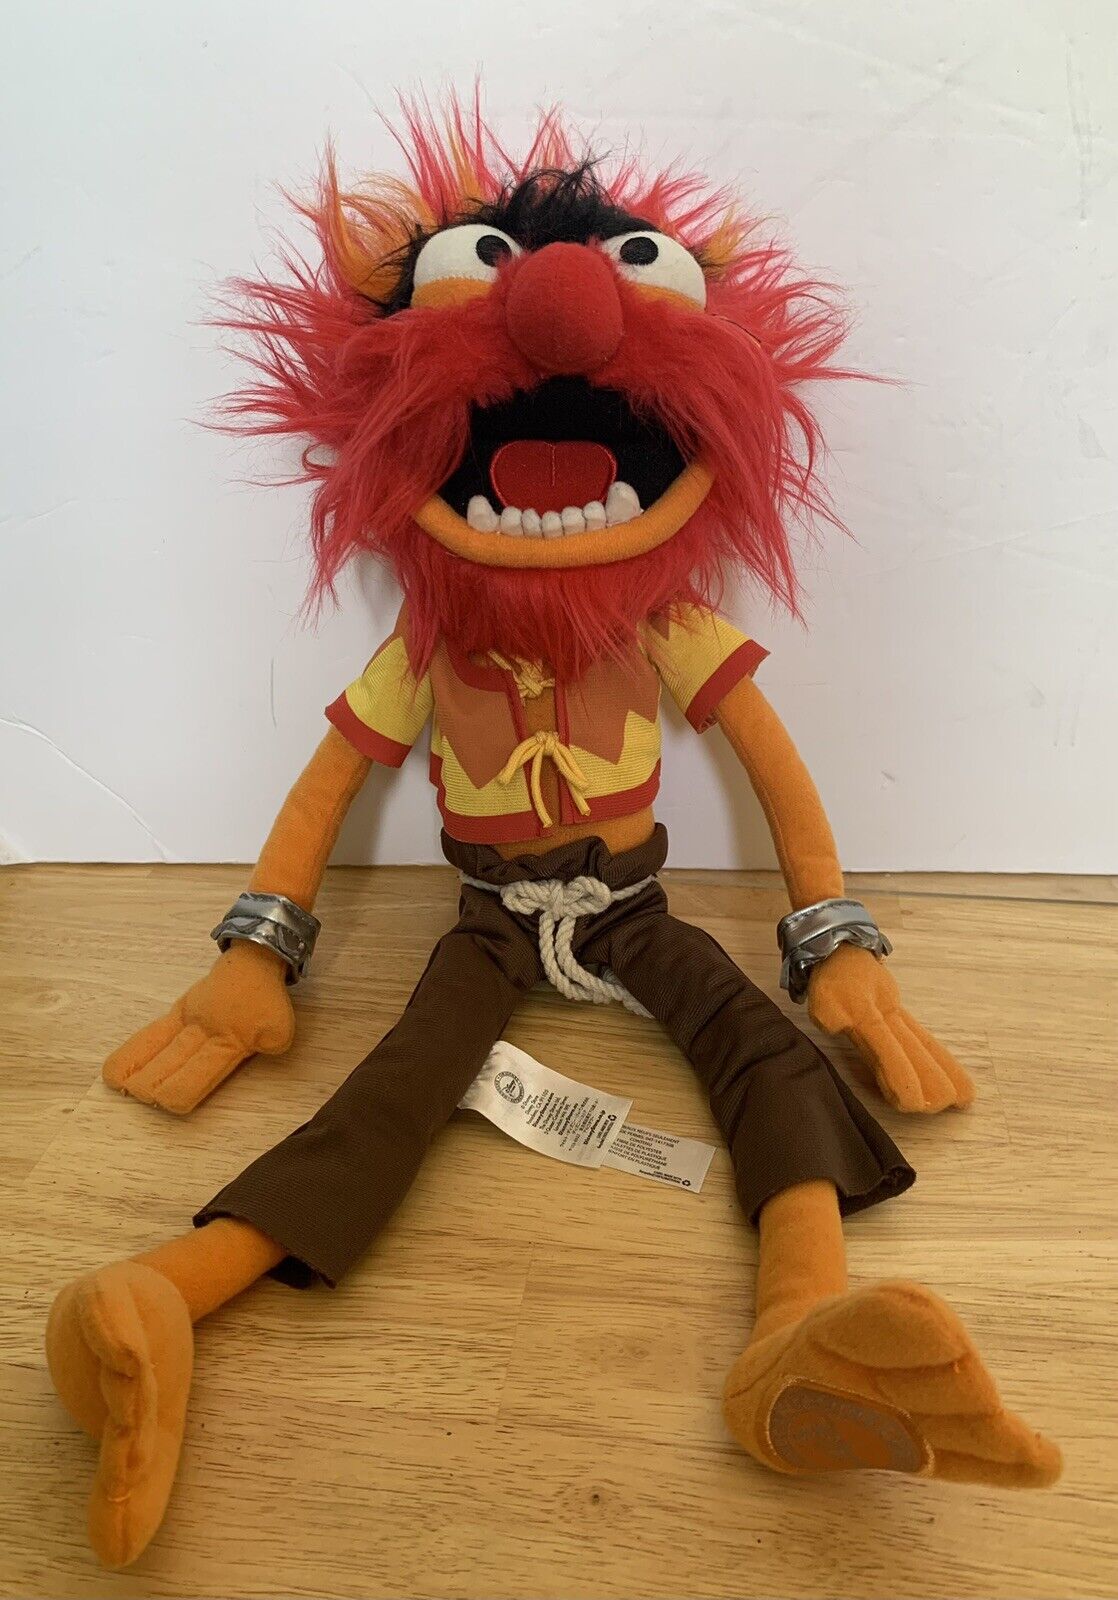 The Muppets Most Wanted Animal Drummer 17” Plush Figure Disney Store Exclusive